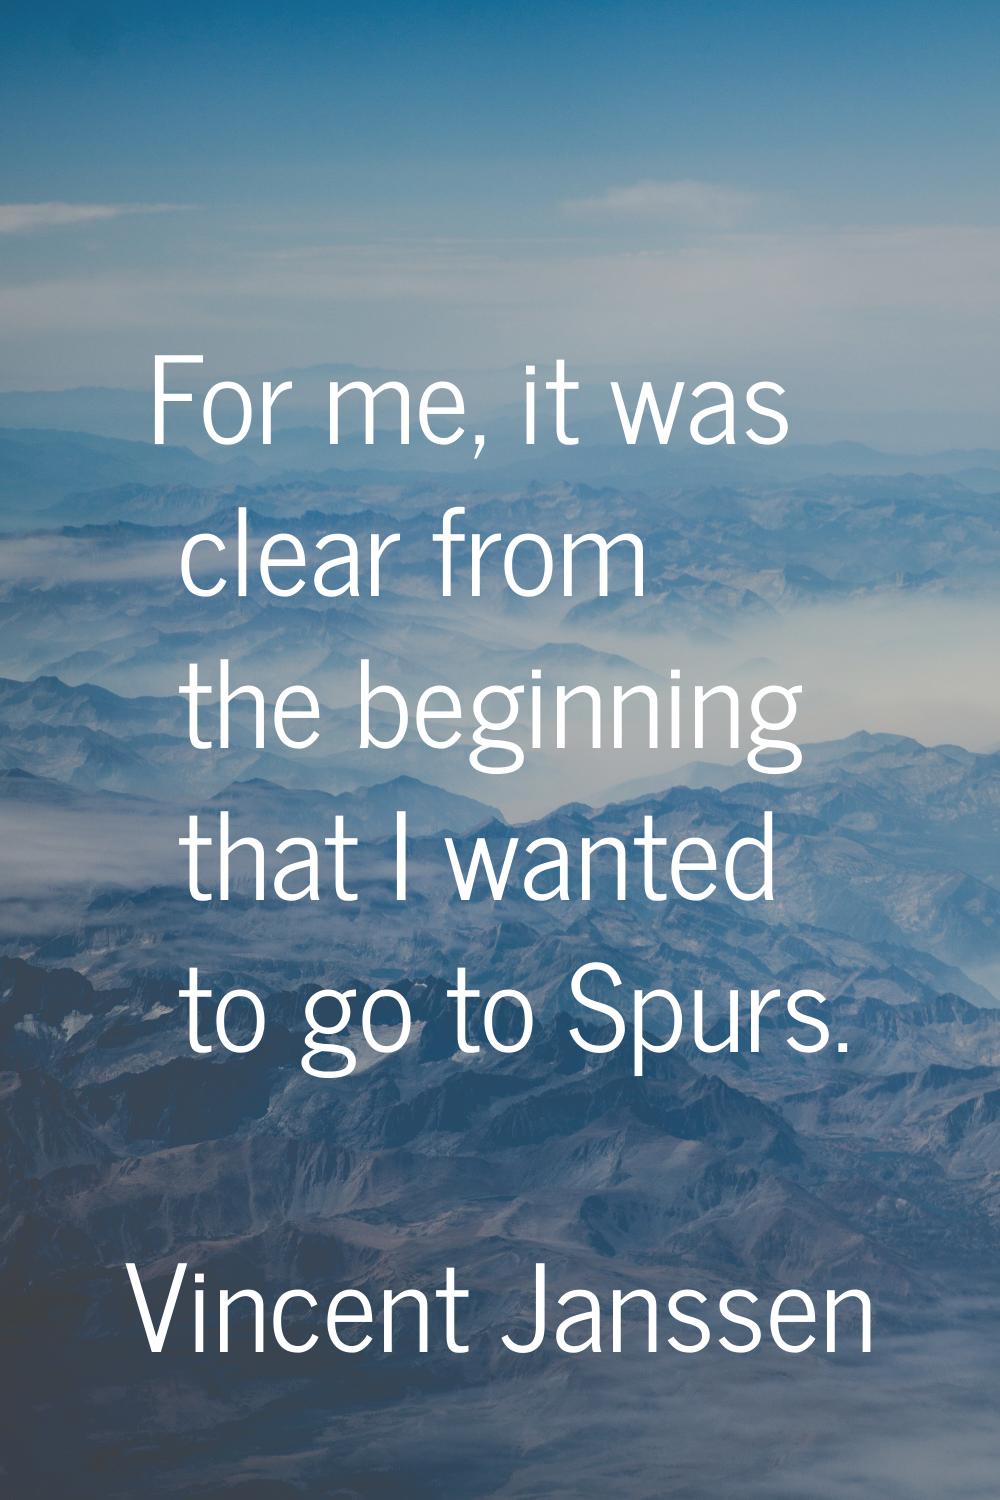 For me, it was clear from the beginning that I wanted to go to Spurs.